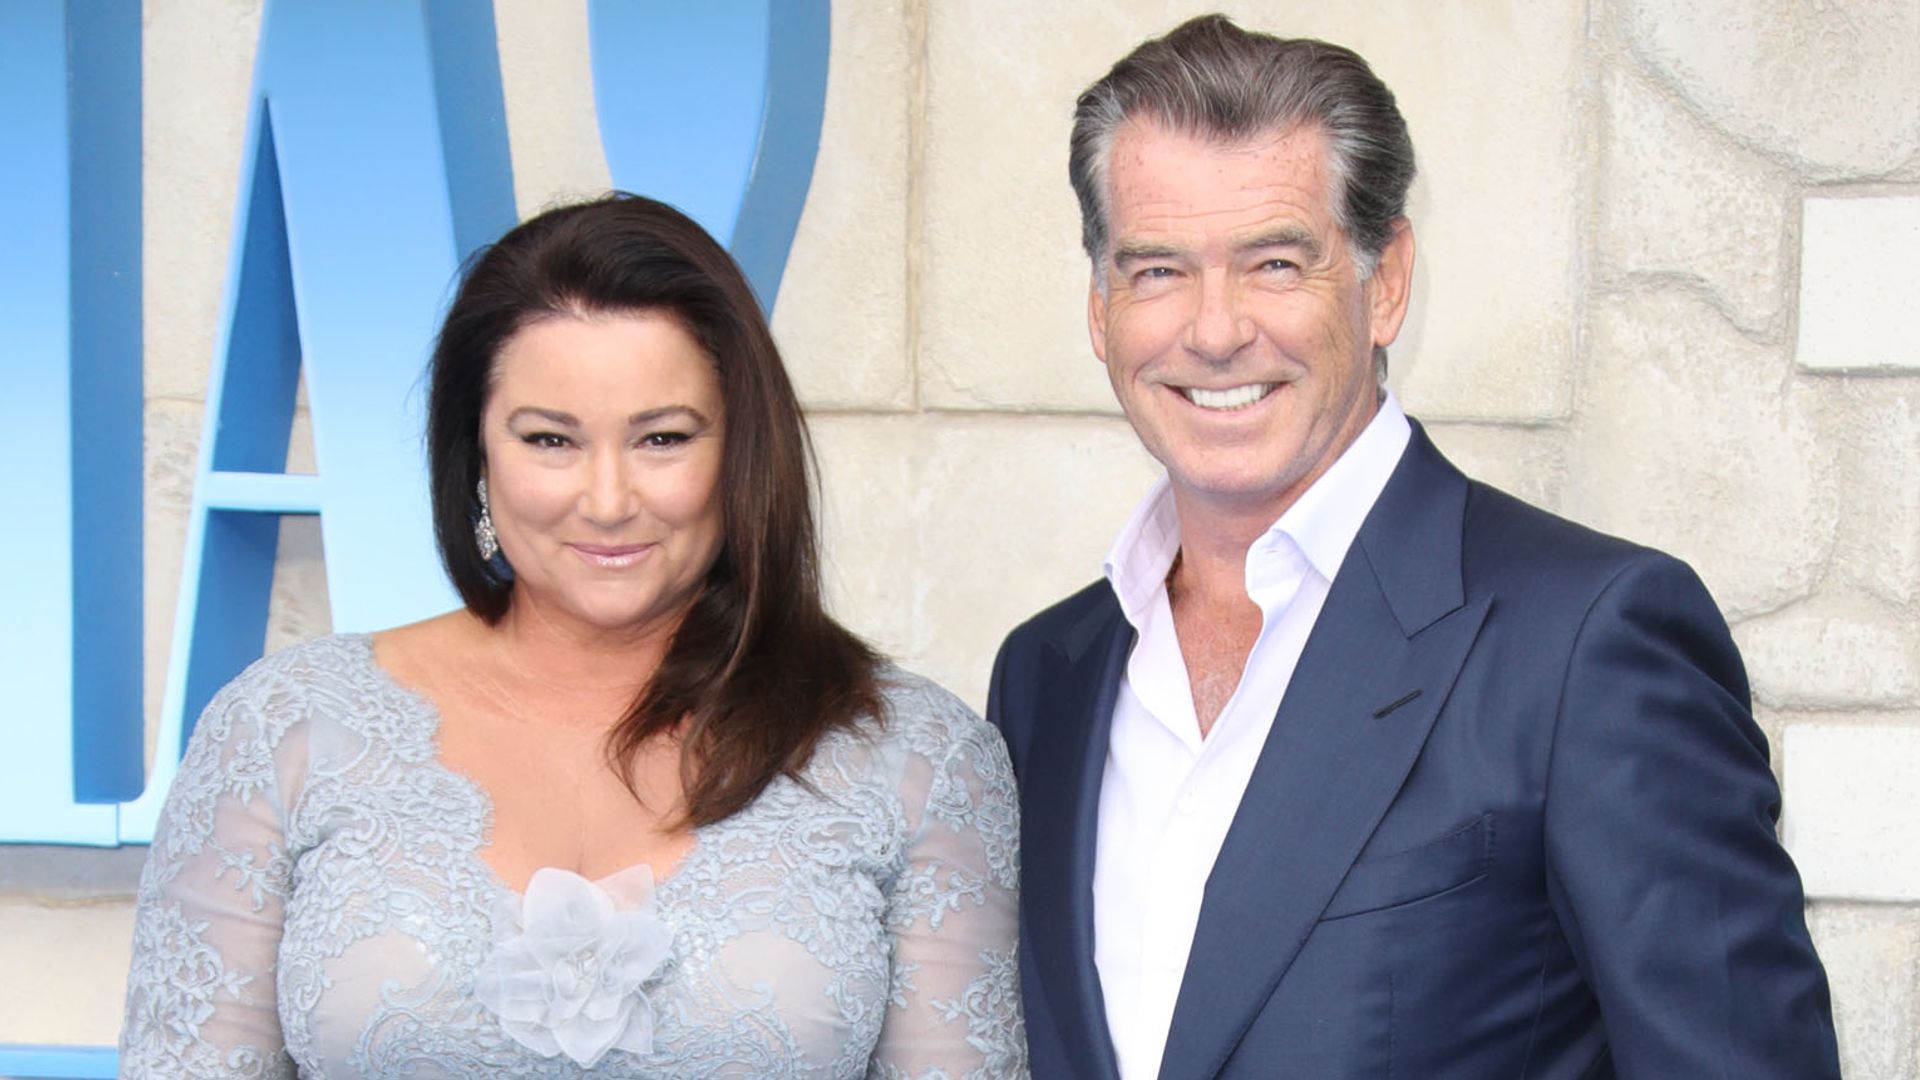 Keely Shaye Smith and Pierce Brosnan attends the World Premiere of "Mamma Mia! Here We Go Again" 